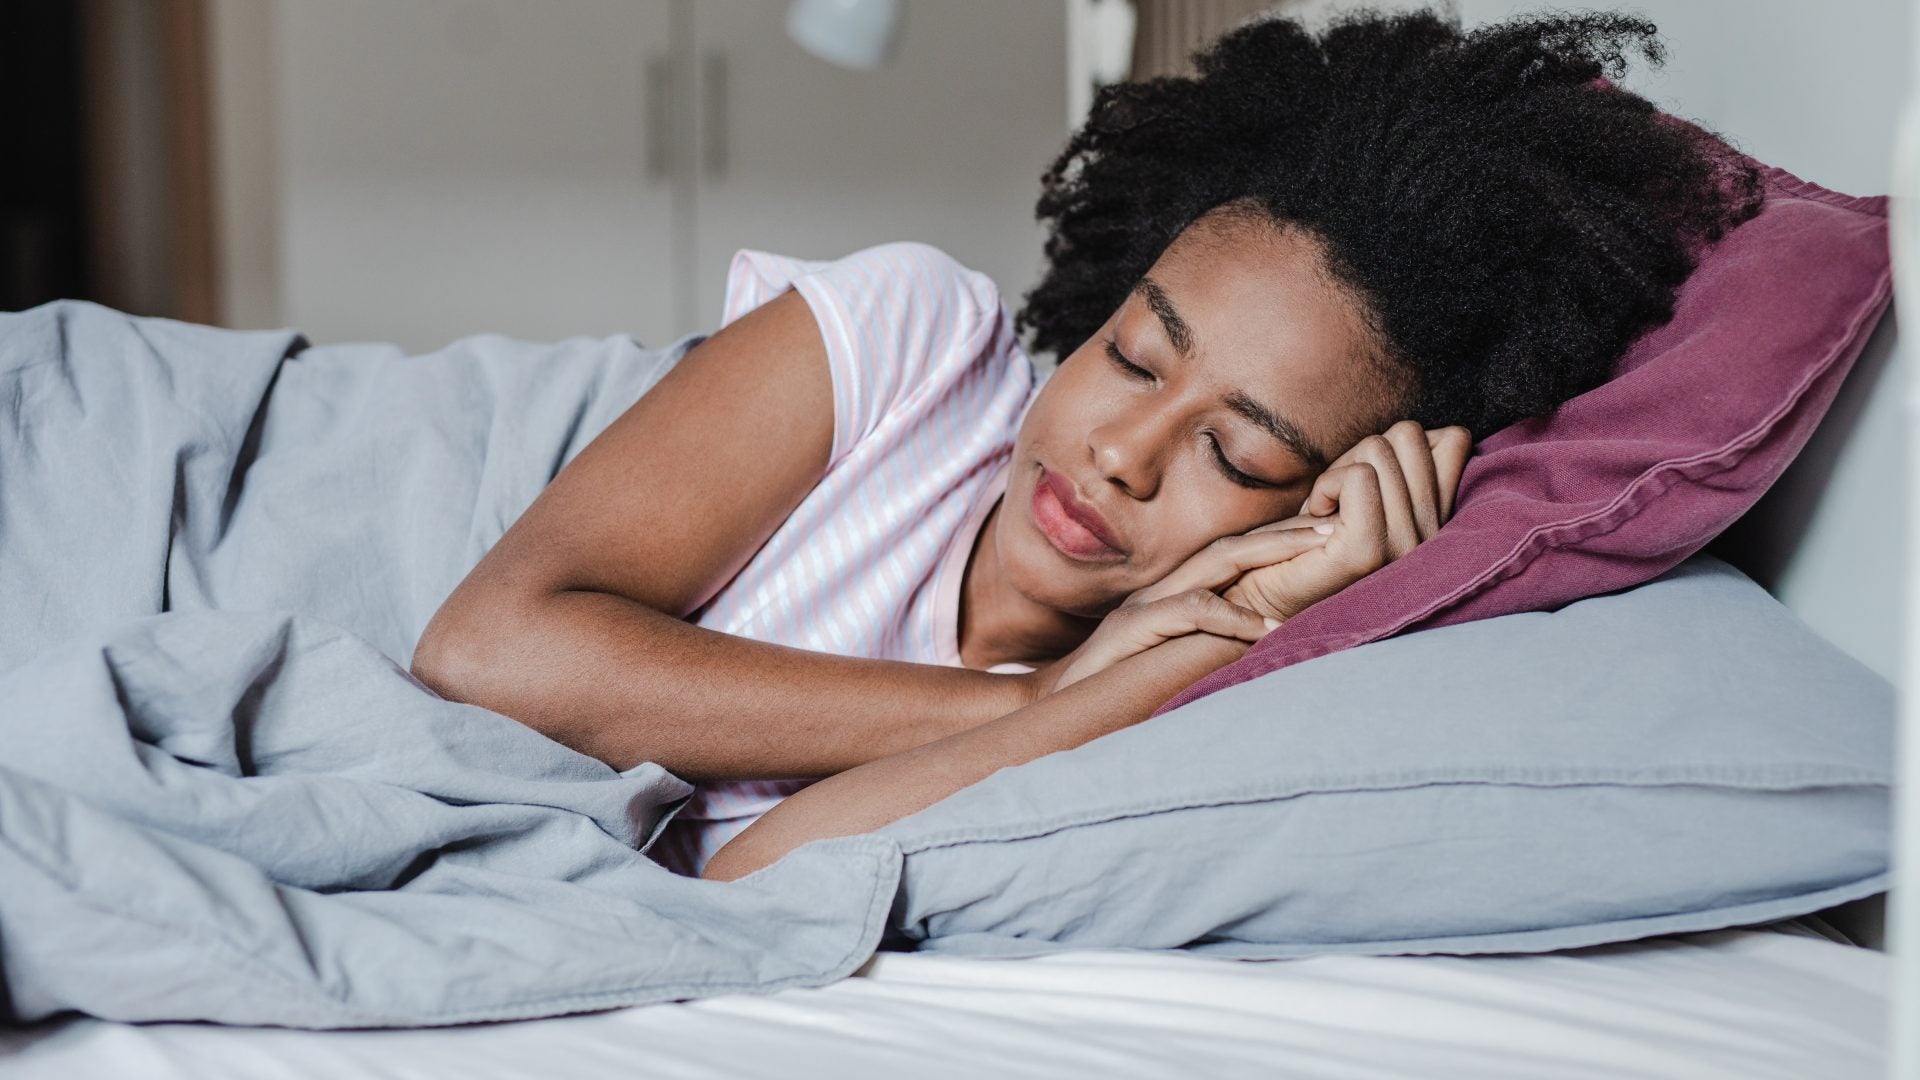 Health Matters: Let’s Talk About Insomnia This National Women’s Health And Fitness Day